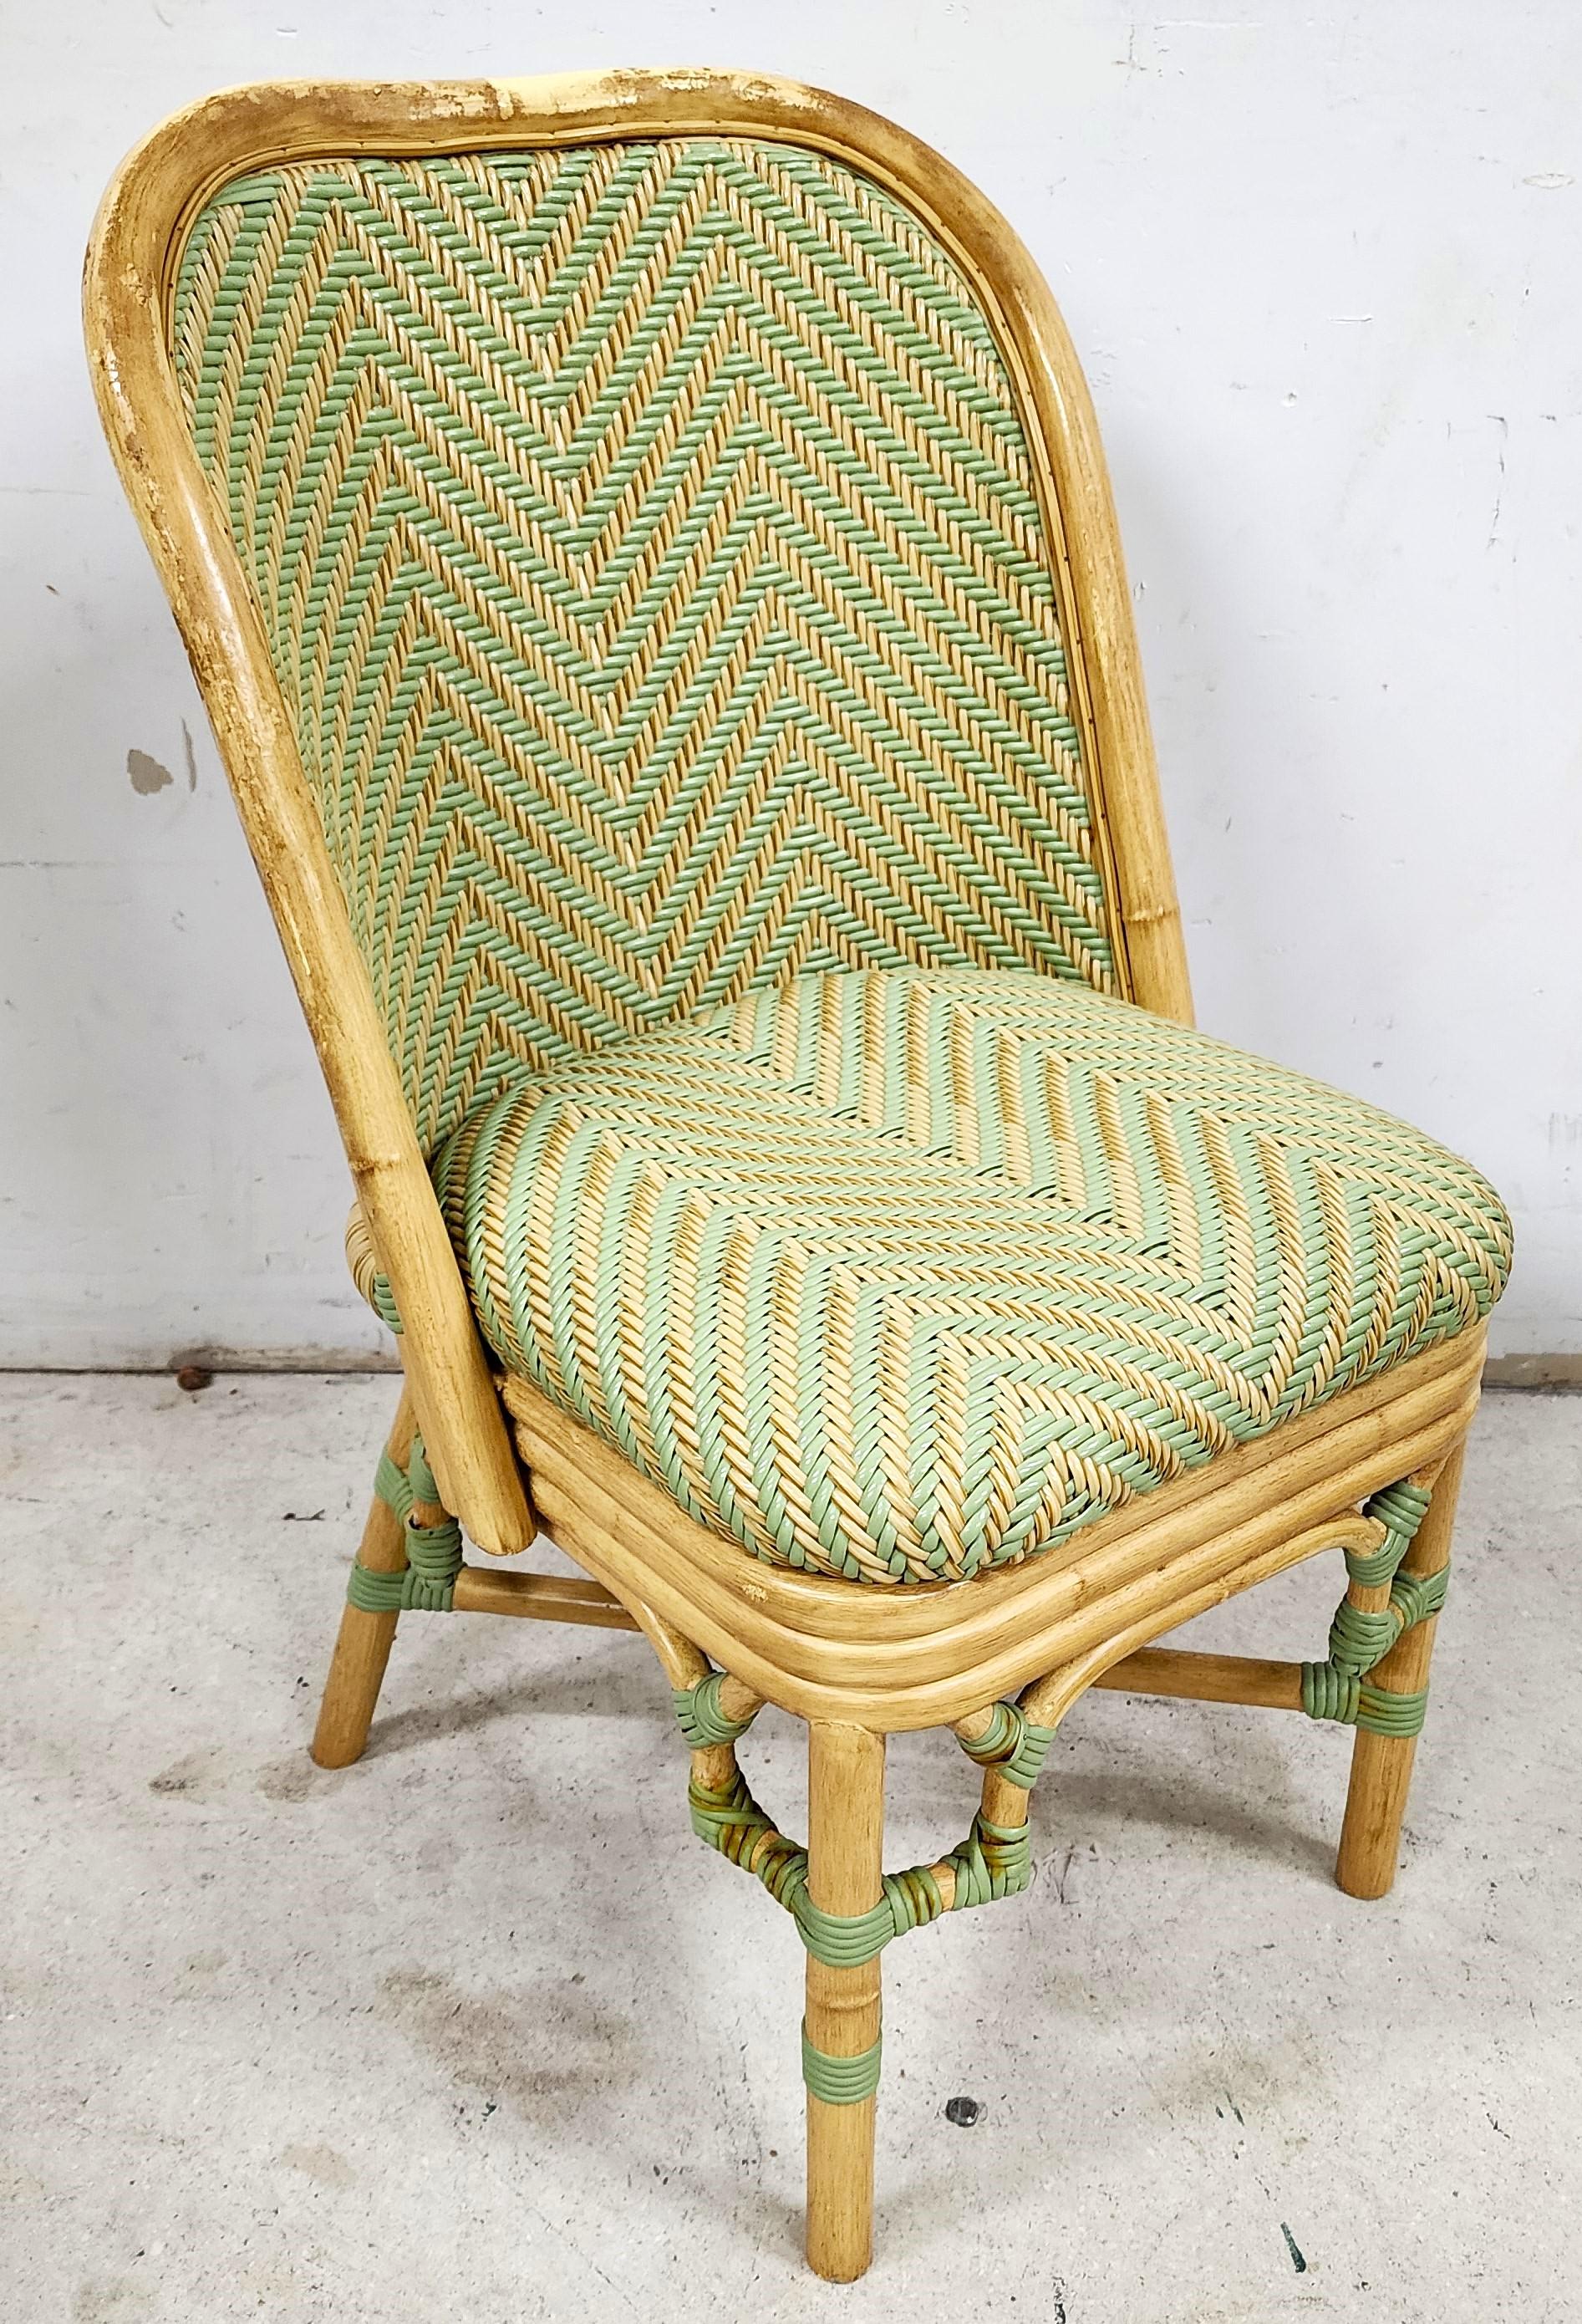 For FULL item description be sure to click on CONTINUE READING at the bottom of this listing.

Offering One Of Our Recent Palm Beach Estate Fine Furniture Acquisitions Of A  
Set of (4) Lane Venture Fine Furniture Pe Rattan Wicker + Faux Bamboo